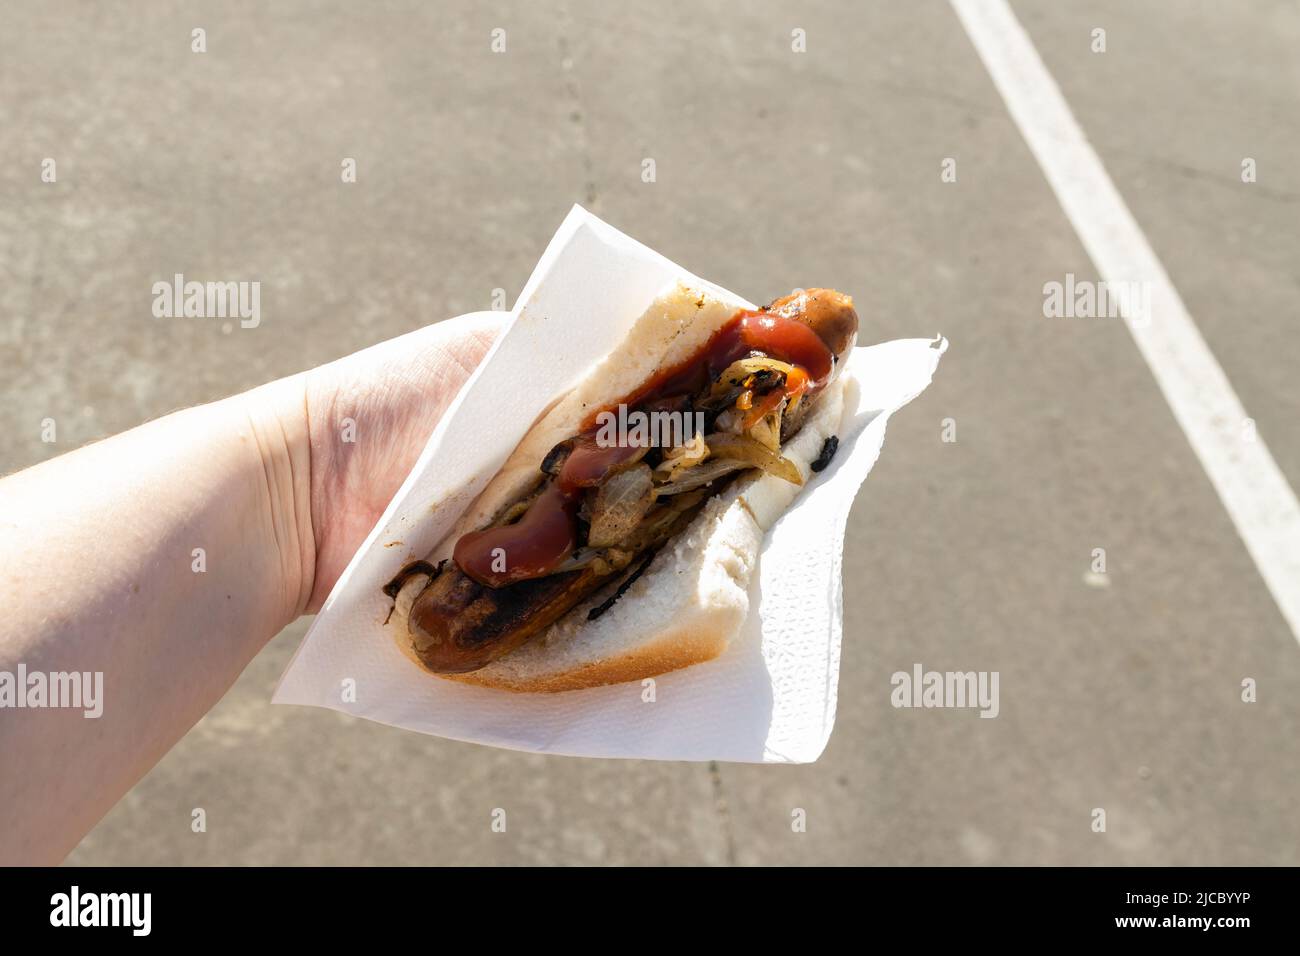 A traditional Australian barbequed sausage in bread with onions and tomato sauce Stock Photo